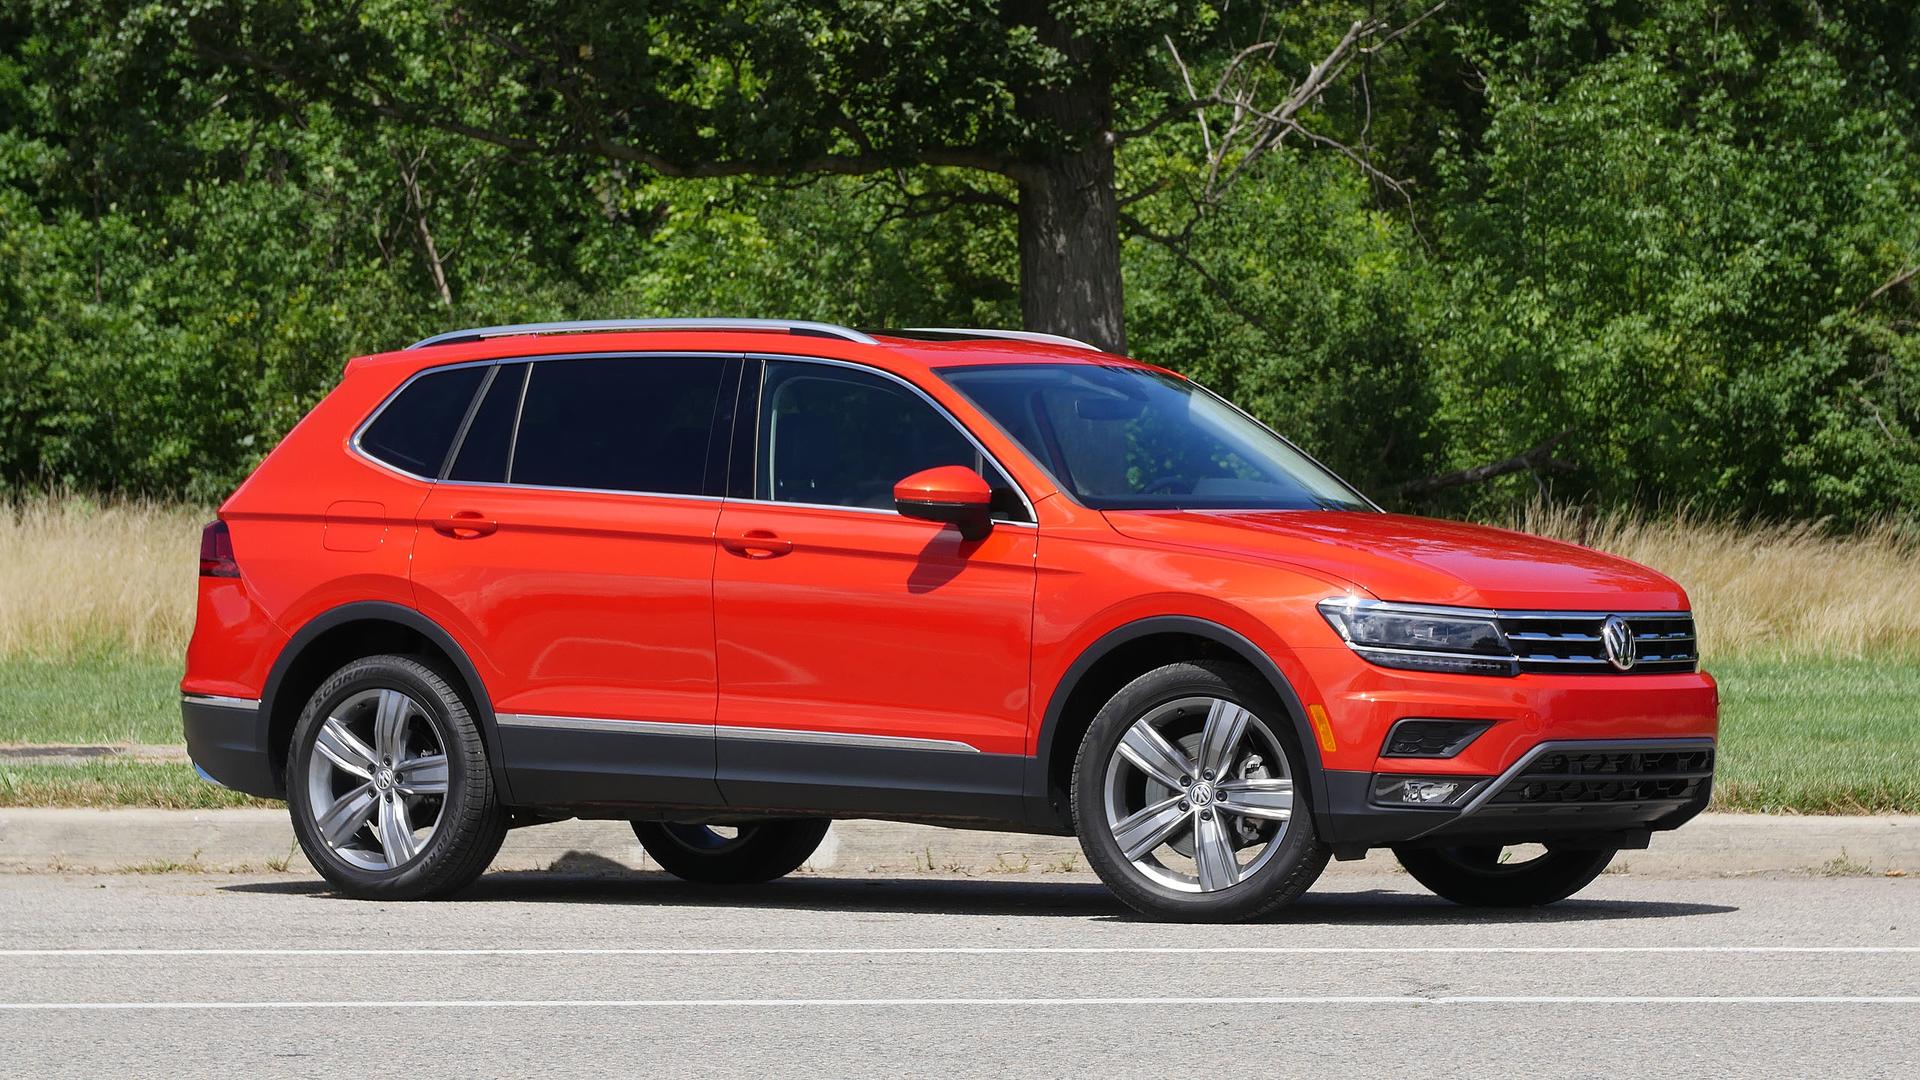 2018 Volkswagen Tiguan Review: Selling Out For Mainstream Sales